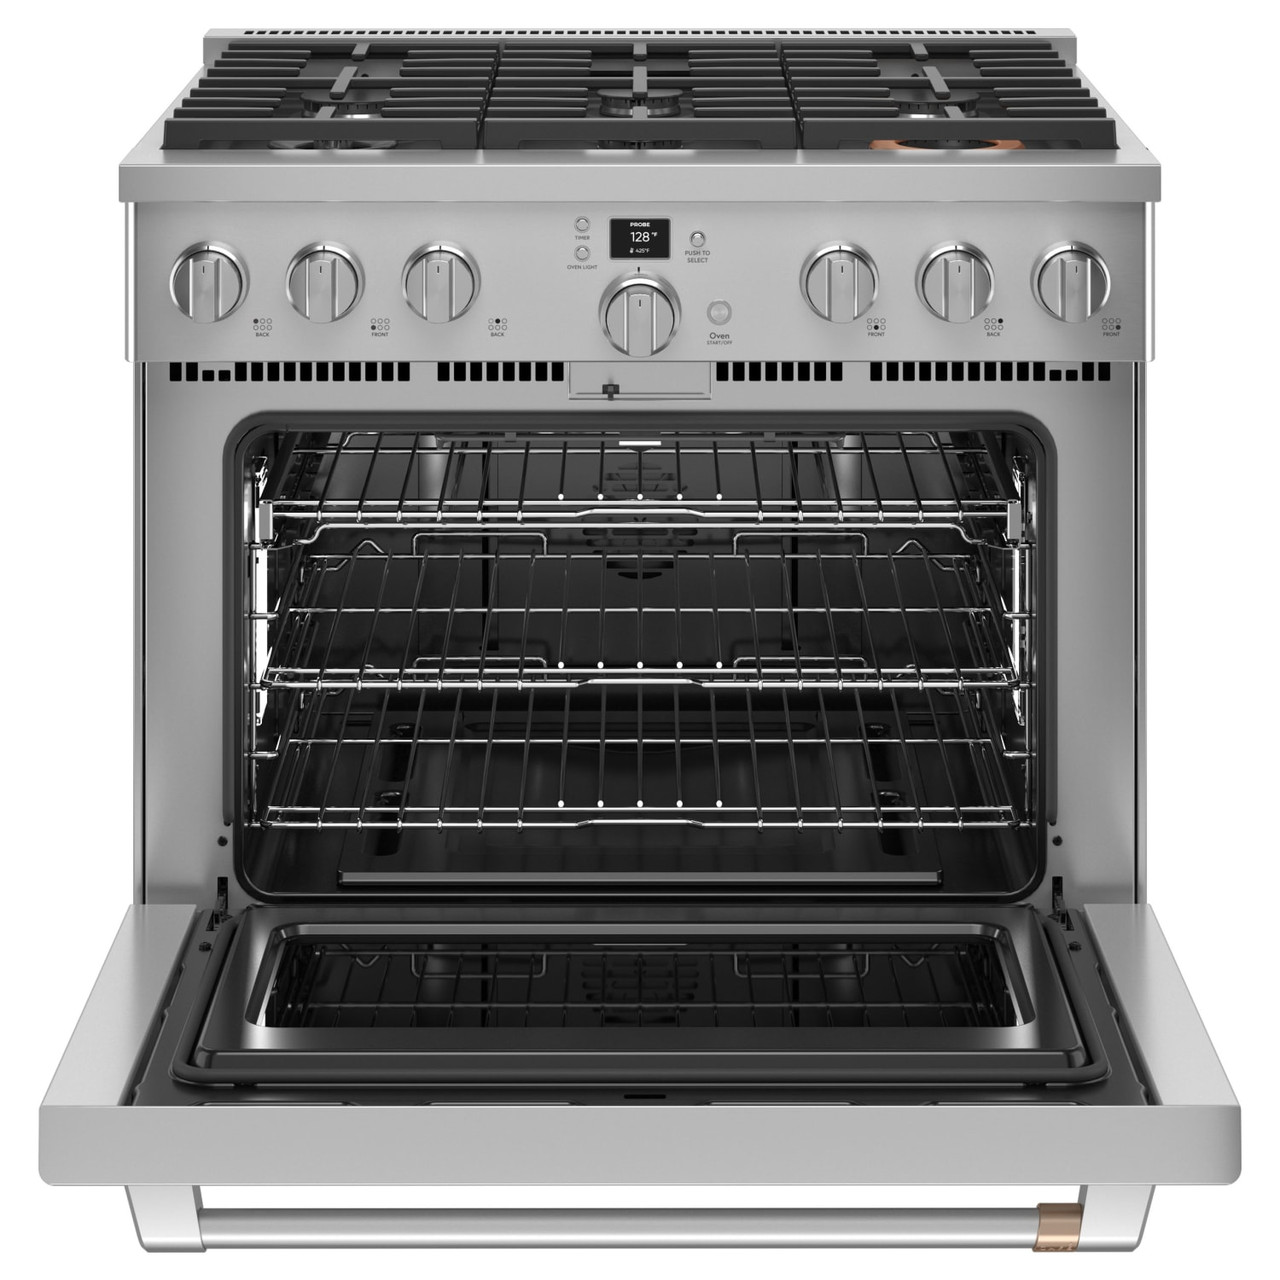 Café™ 36” Smart All-Gas Commercial-Style Range with 6 Burners (Natural Gas) - Stainless Steel - CGY366P2TS1